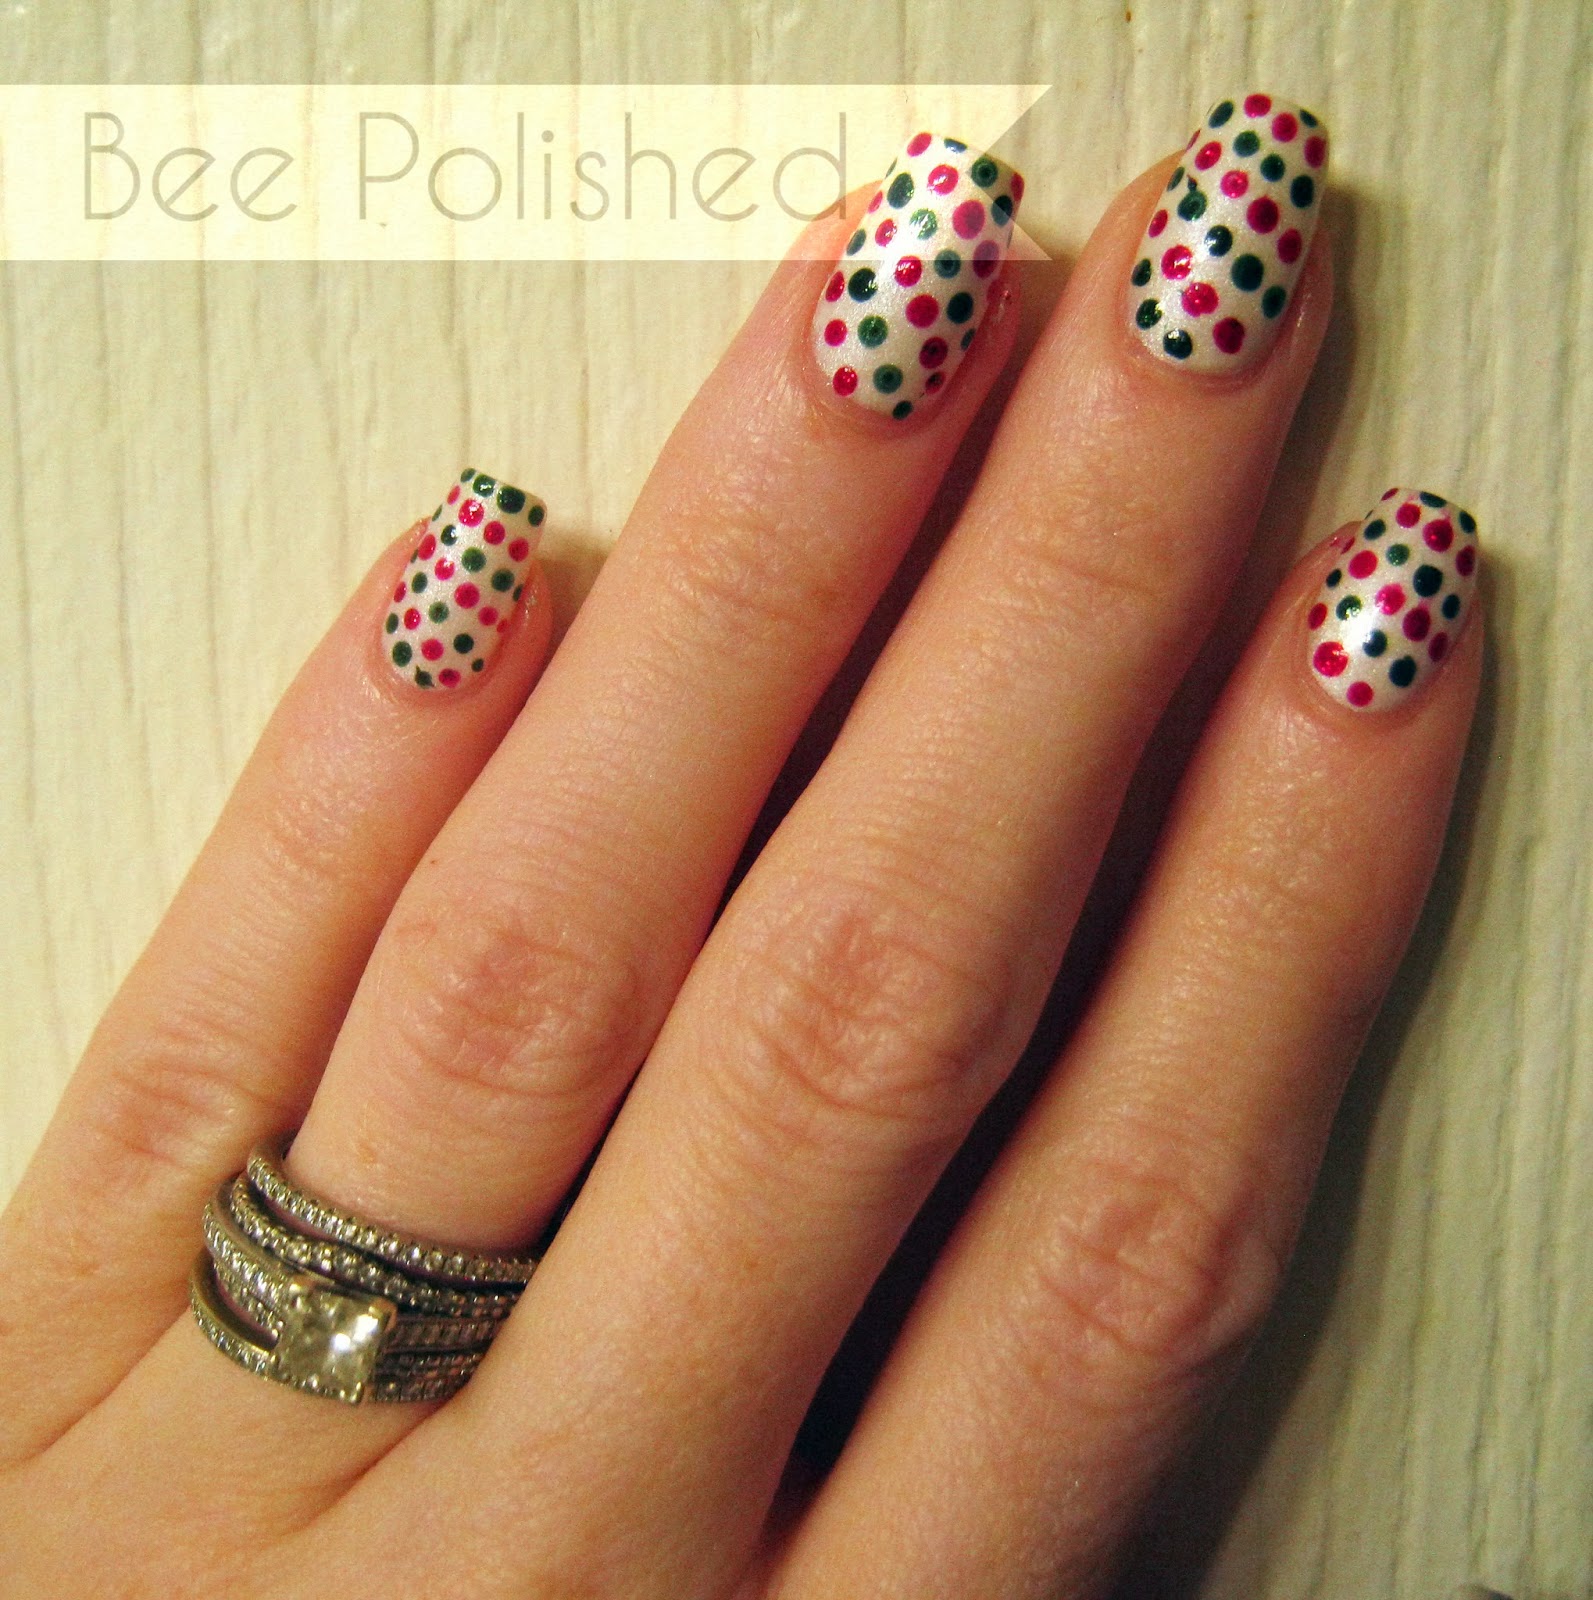 Lots of dots... - Bee Polished